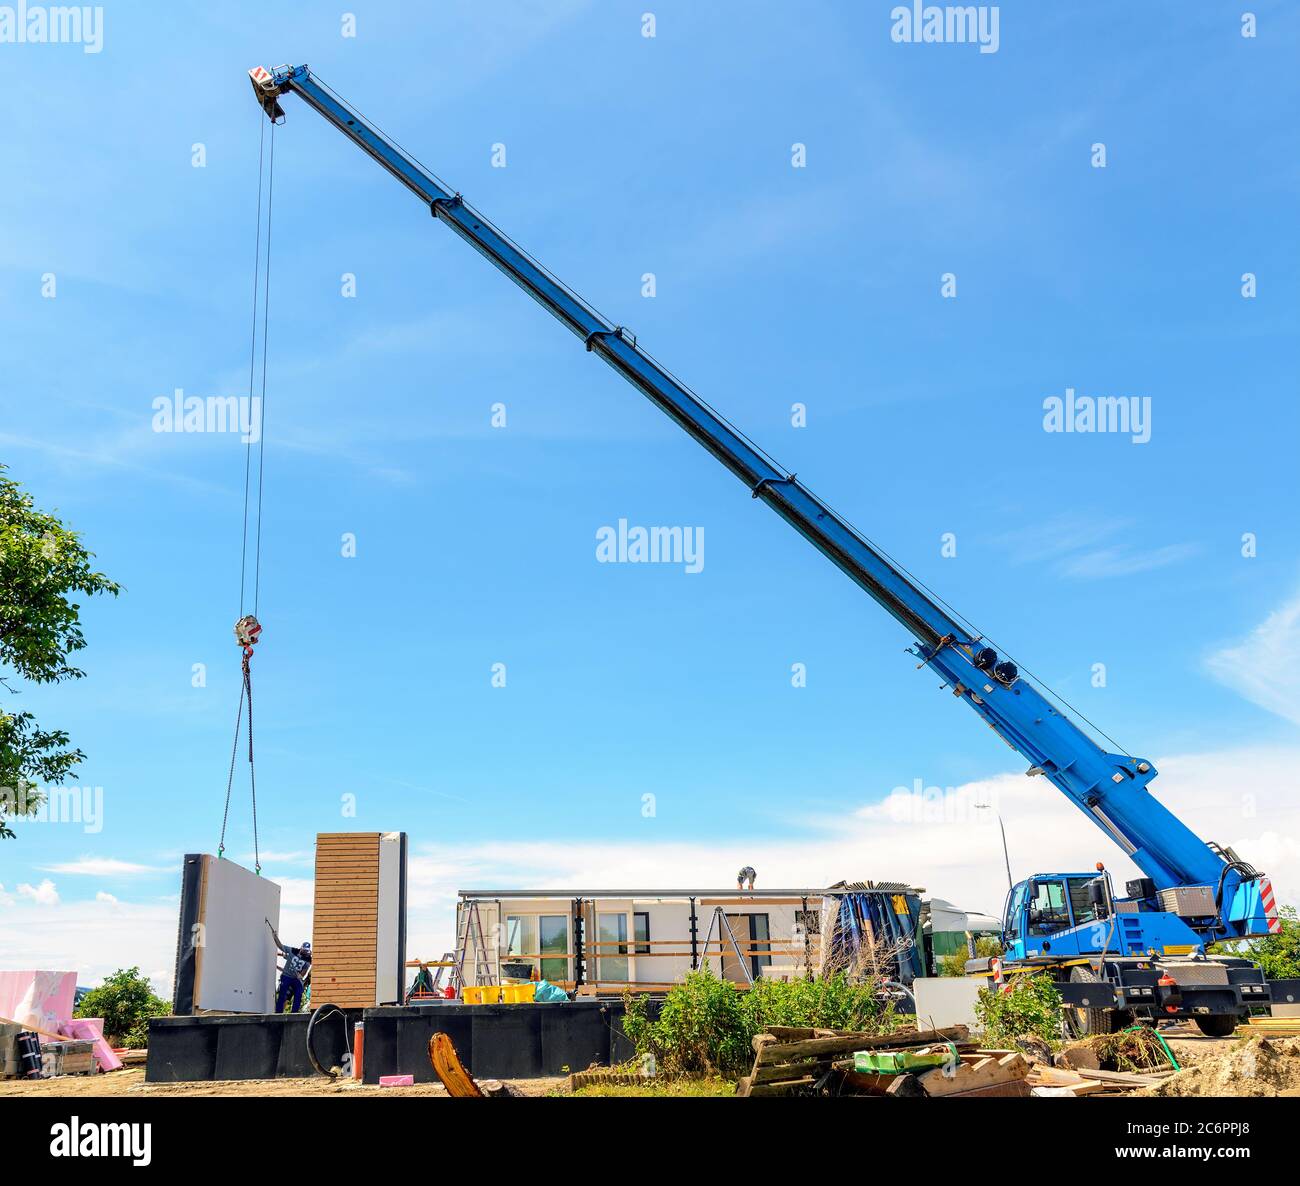 mobile crane on a construction site lifts a wall of a prefabricated house onto the foundation Stock Photo